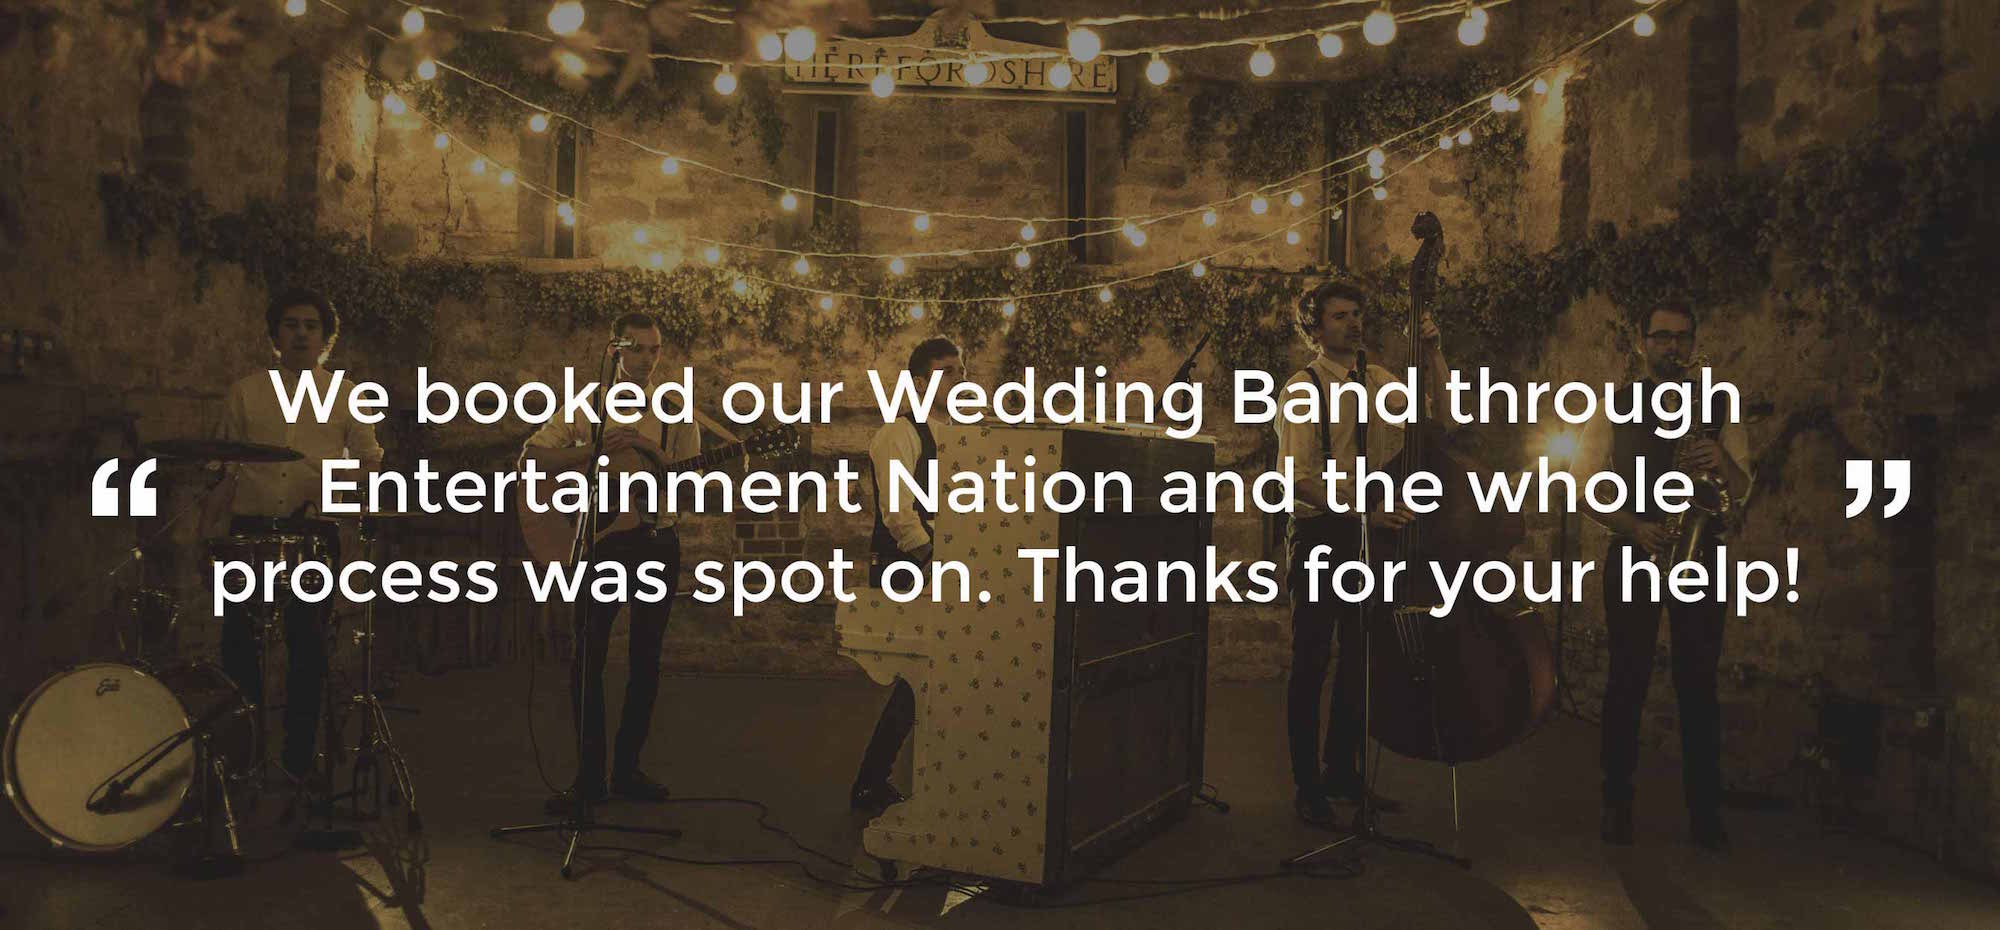 Client Review of a Wedding Band Bedfordshire